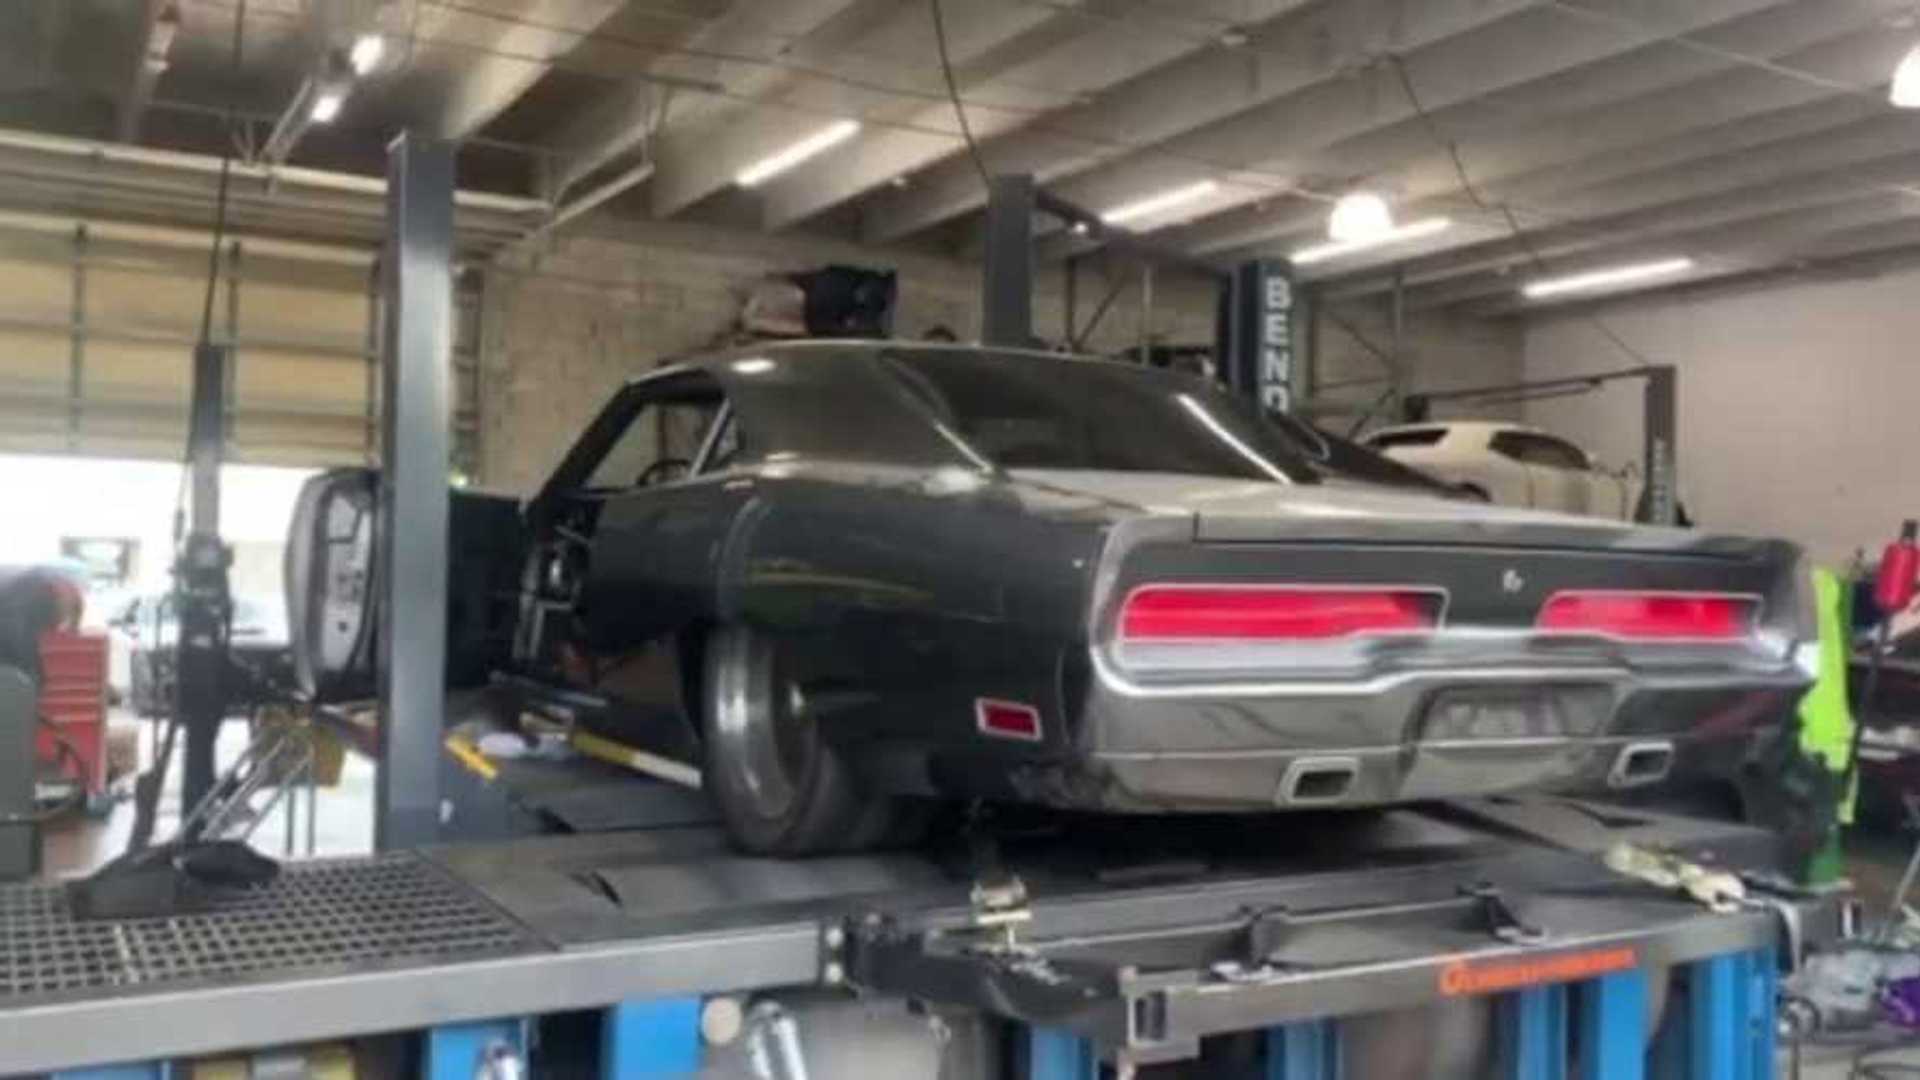 Oldtimer, 28.120 km, 10/1970, 170 kw (231 ps), benzin. Speedkore S 1970 Dodge Charger Hellephant Sounds Incredible On Dyno